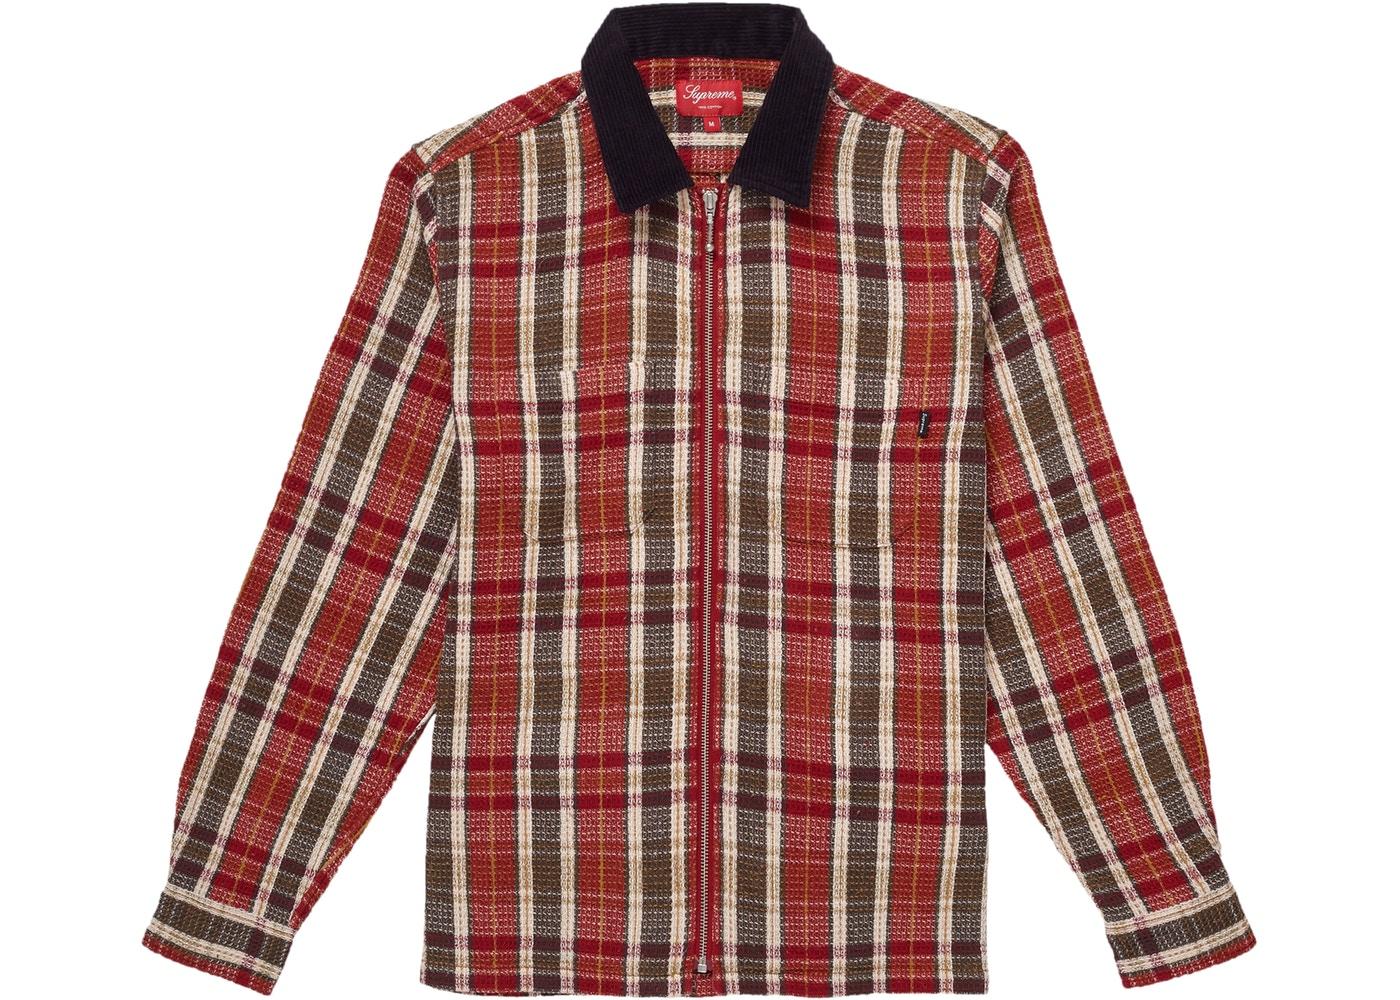 https://images-wp.stockx.com/news/wp-content/uploads/2018/10/Supreme-Plaid-Thermal-Zip-Up-Shirt-Dusty-Red.jpg